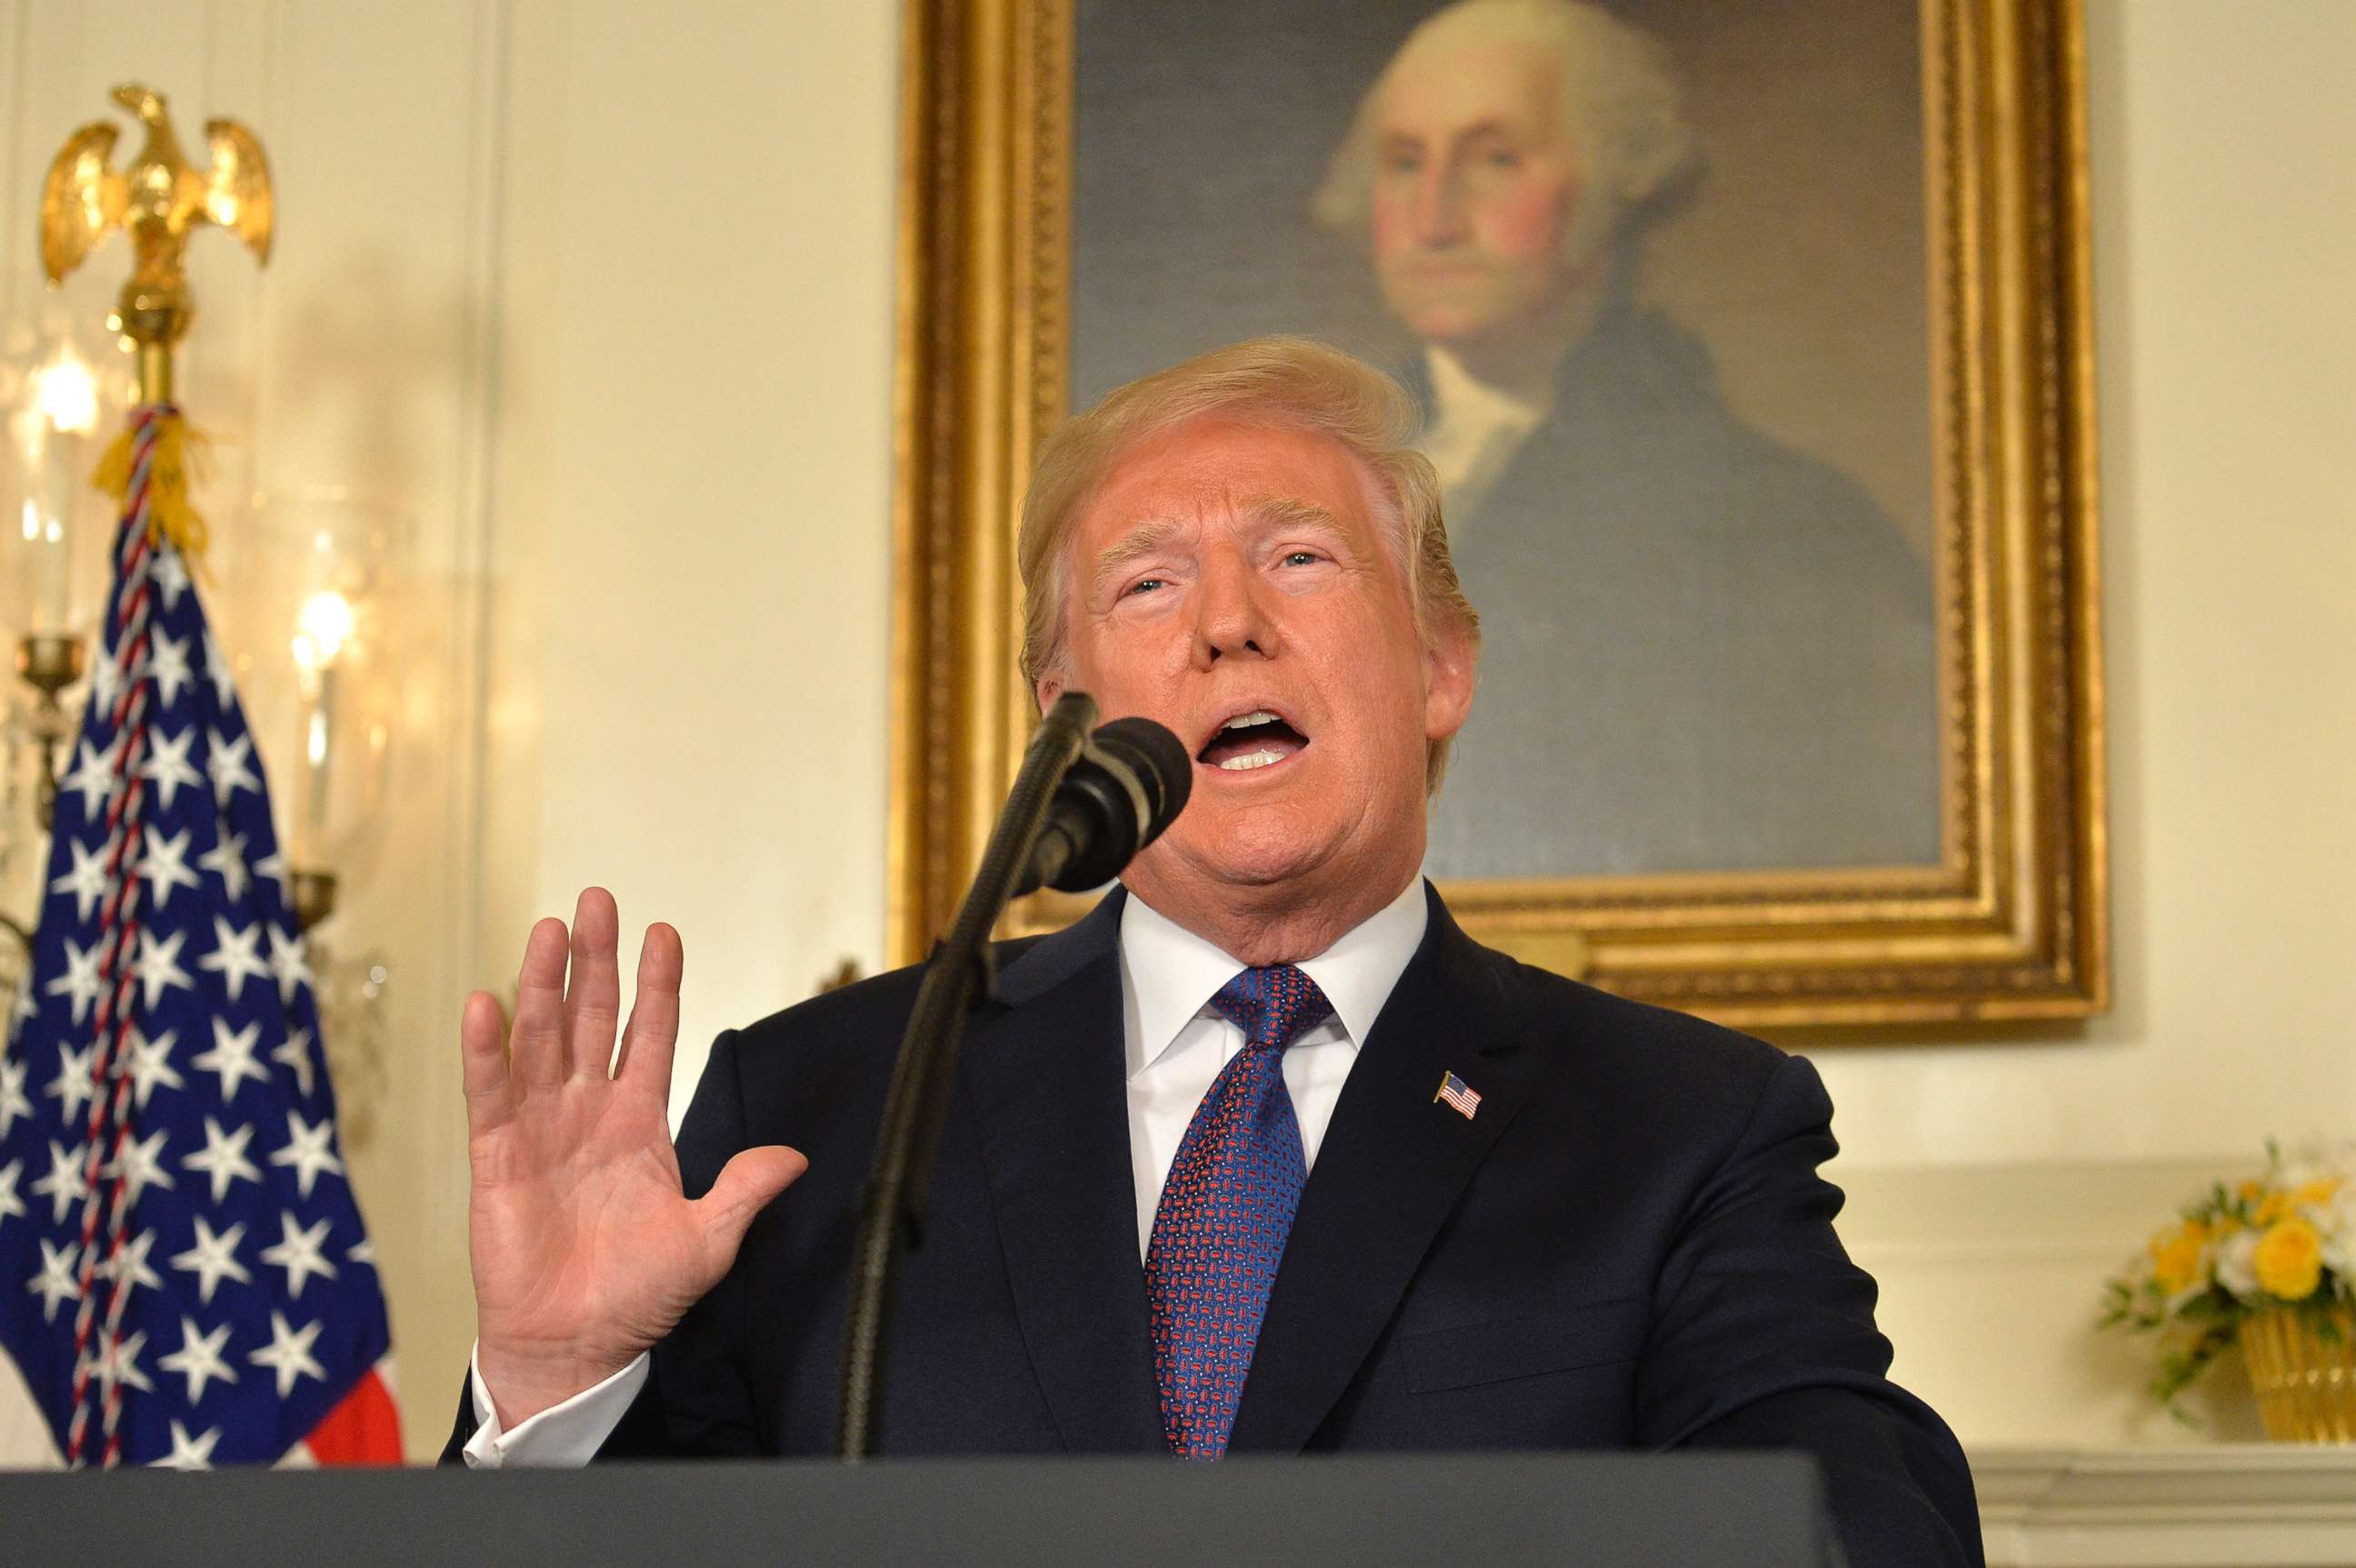 PHOTO: President Donald Trump makes remarks as he speaks to the nation, announcing military action against Syria for the recent apparent gas attack on its civilians, at the White House, April 13, 2018, in Washington, D.C.